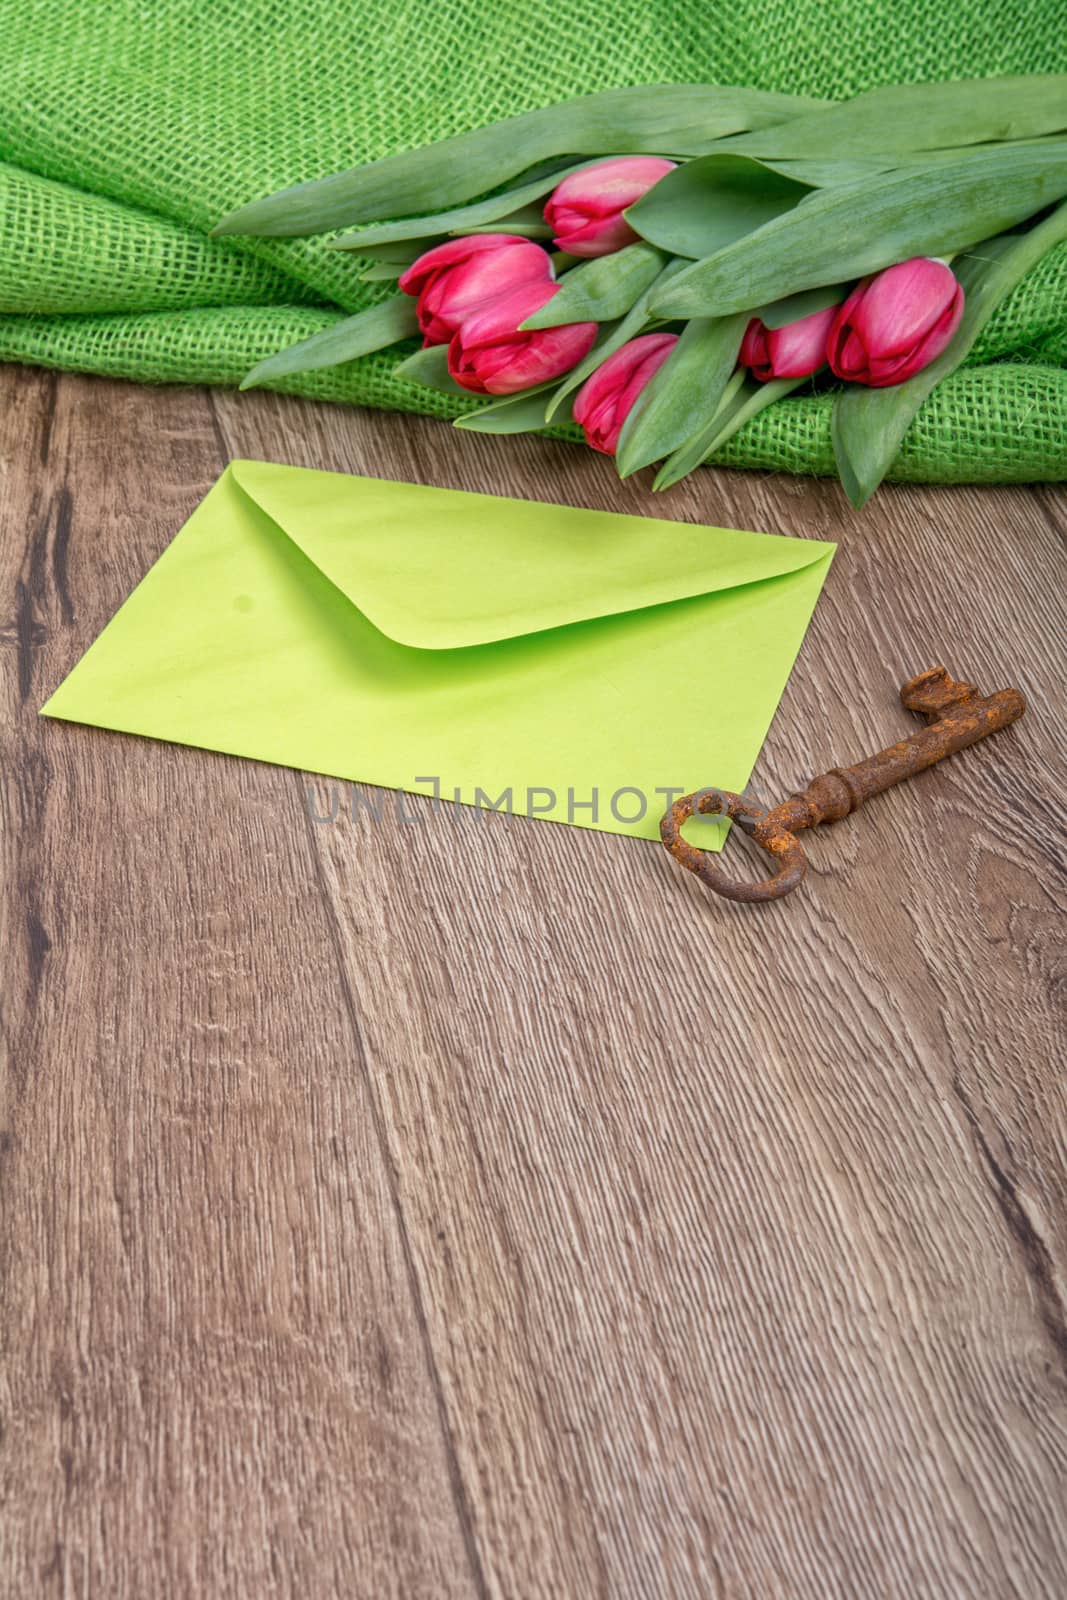 Envelope, rusty key and tulip on a wooden background by neryx